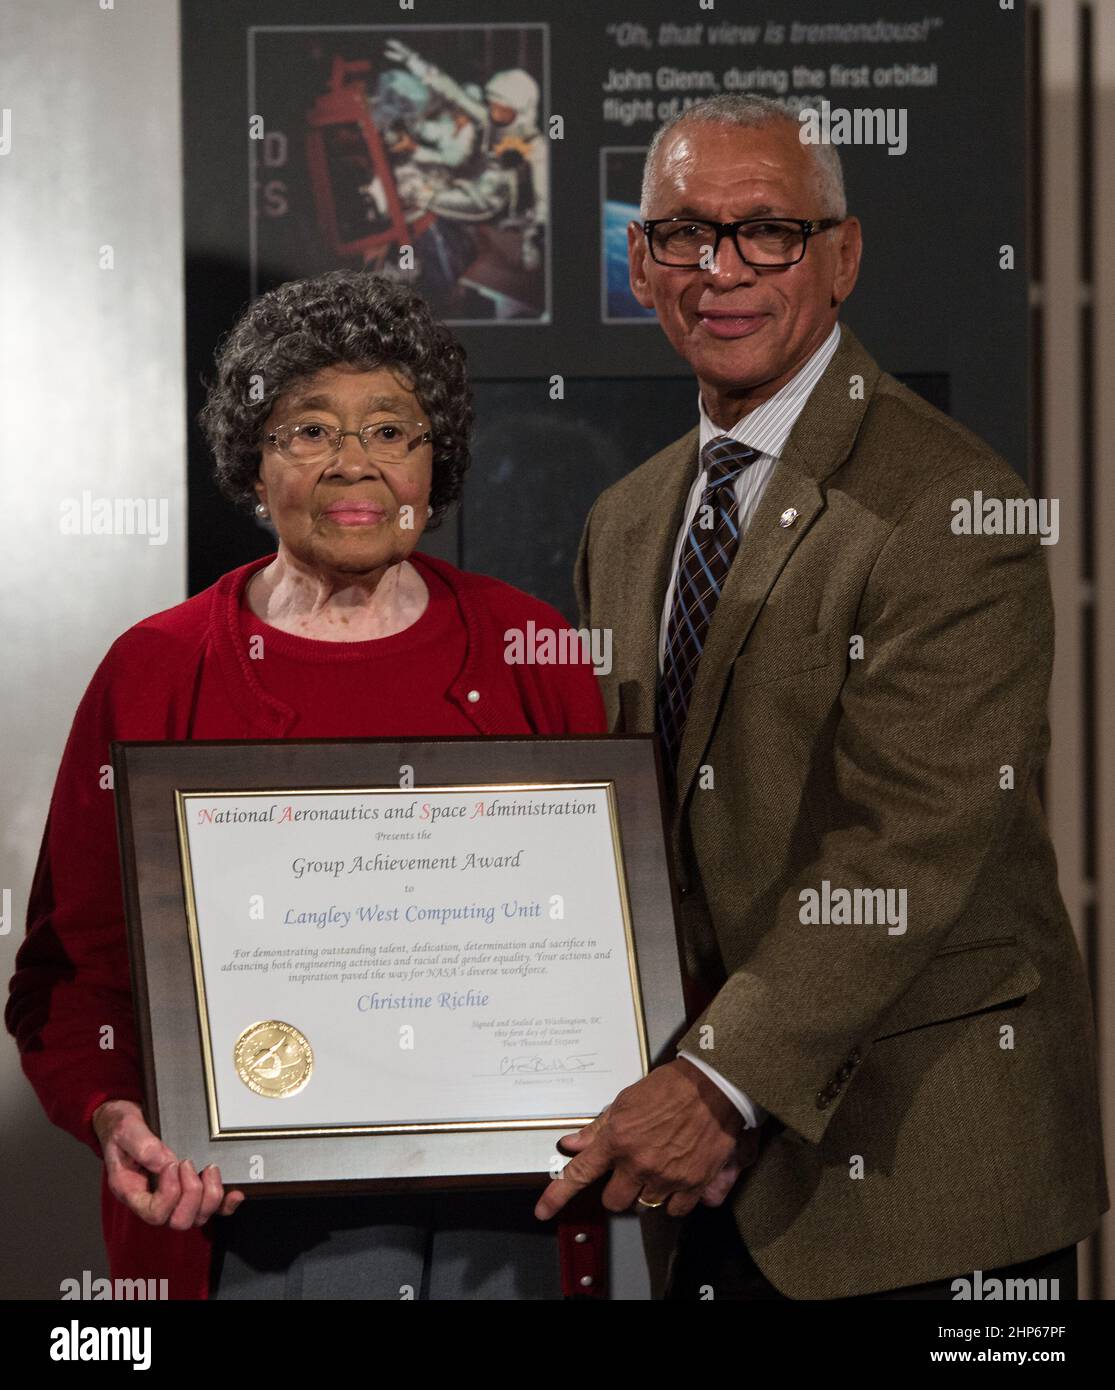 NASA Administrator Charles Bolden presents an award to NASA 'human computer' Christine Richie, at a reception to honor NASA's 'human computers' on Thursday, Dec. 1, 2016, at the Virginia Air and Space Center in Hampton, VA. Afterward, the guests attended a premiere of 'Hidden Figures' a film which stars Taraji P. Henson as Katherine Johnson, the African American mathematician, physicist, and space scientist, who calculated flight trajectories for John Glenn's first orbital flight in 1962. Stock Photo